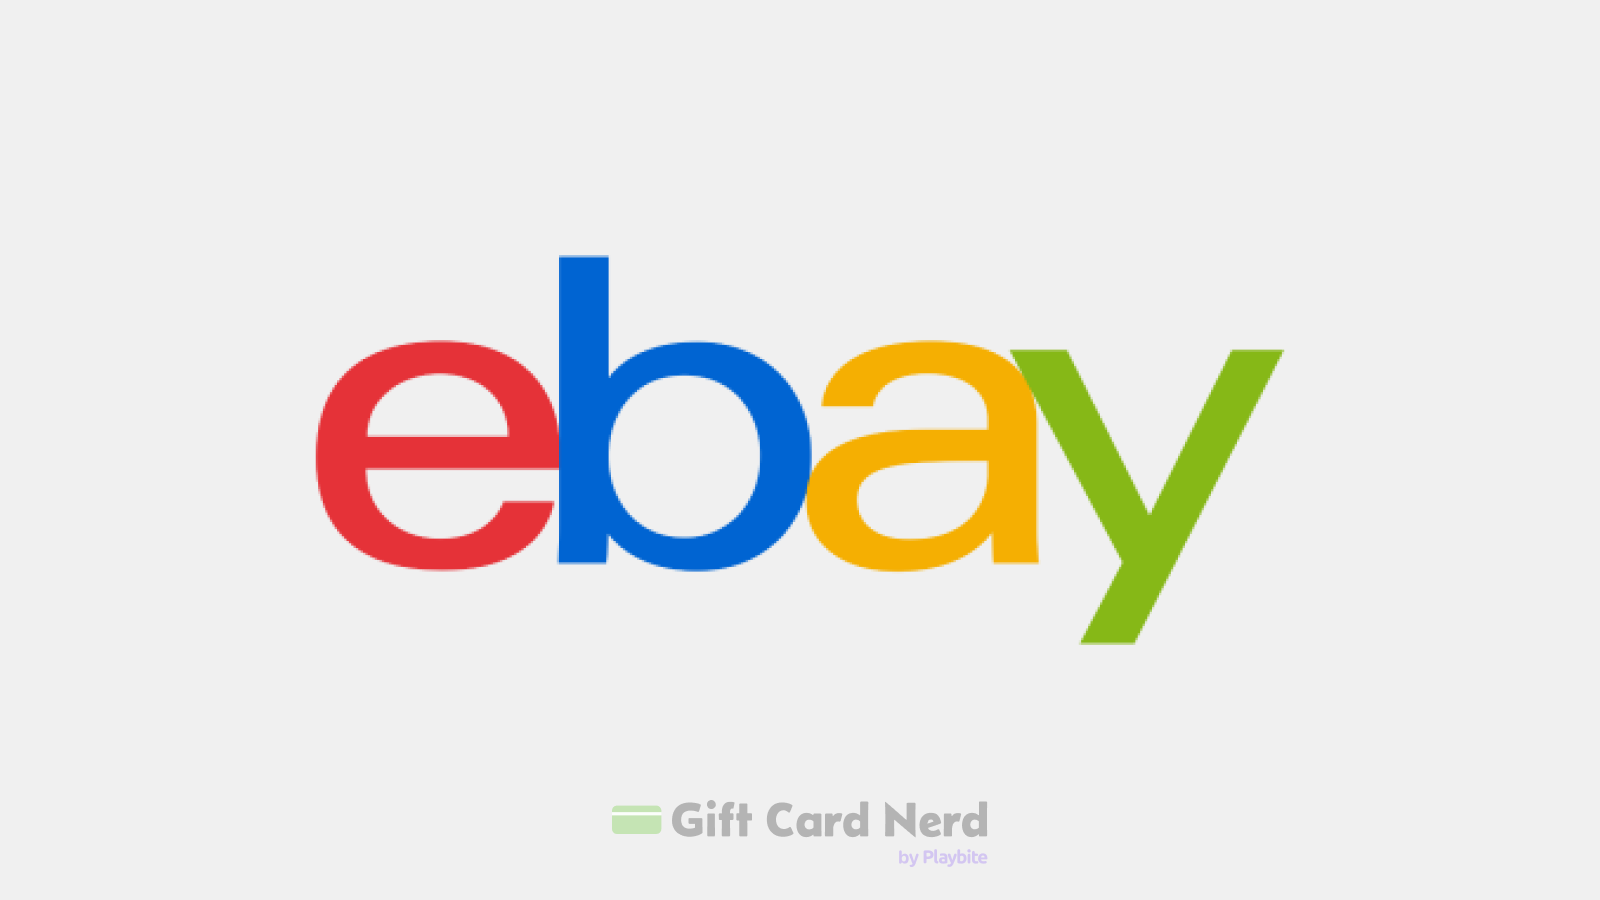 Can I Use an eBay Gift Card on Amazon?